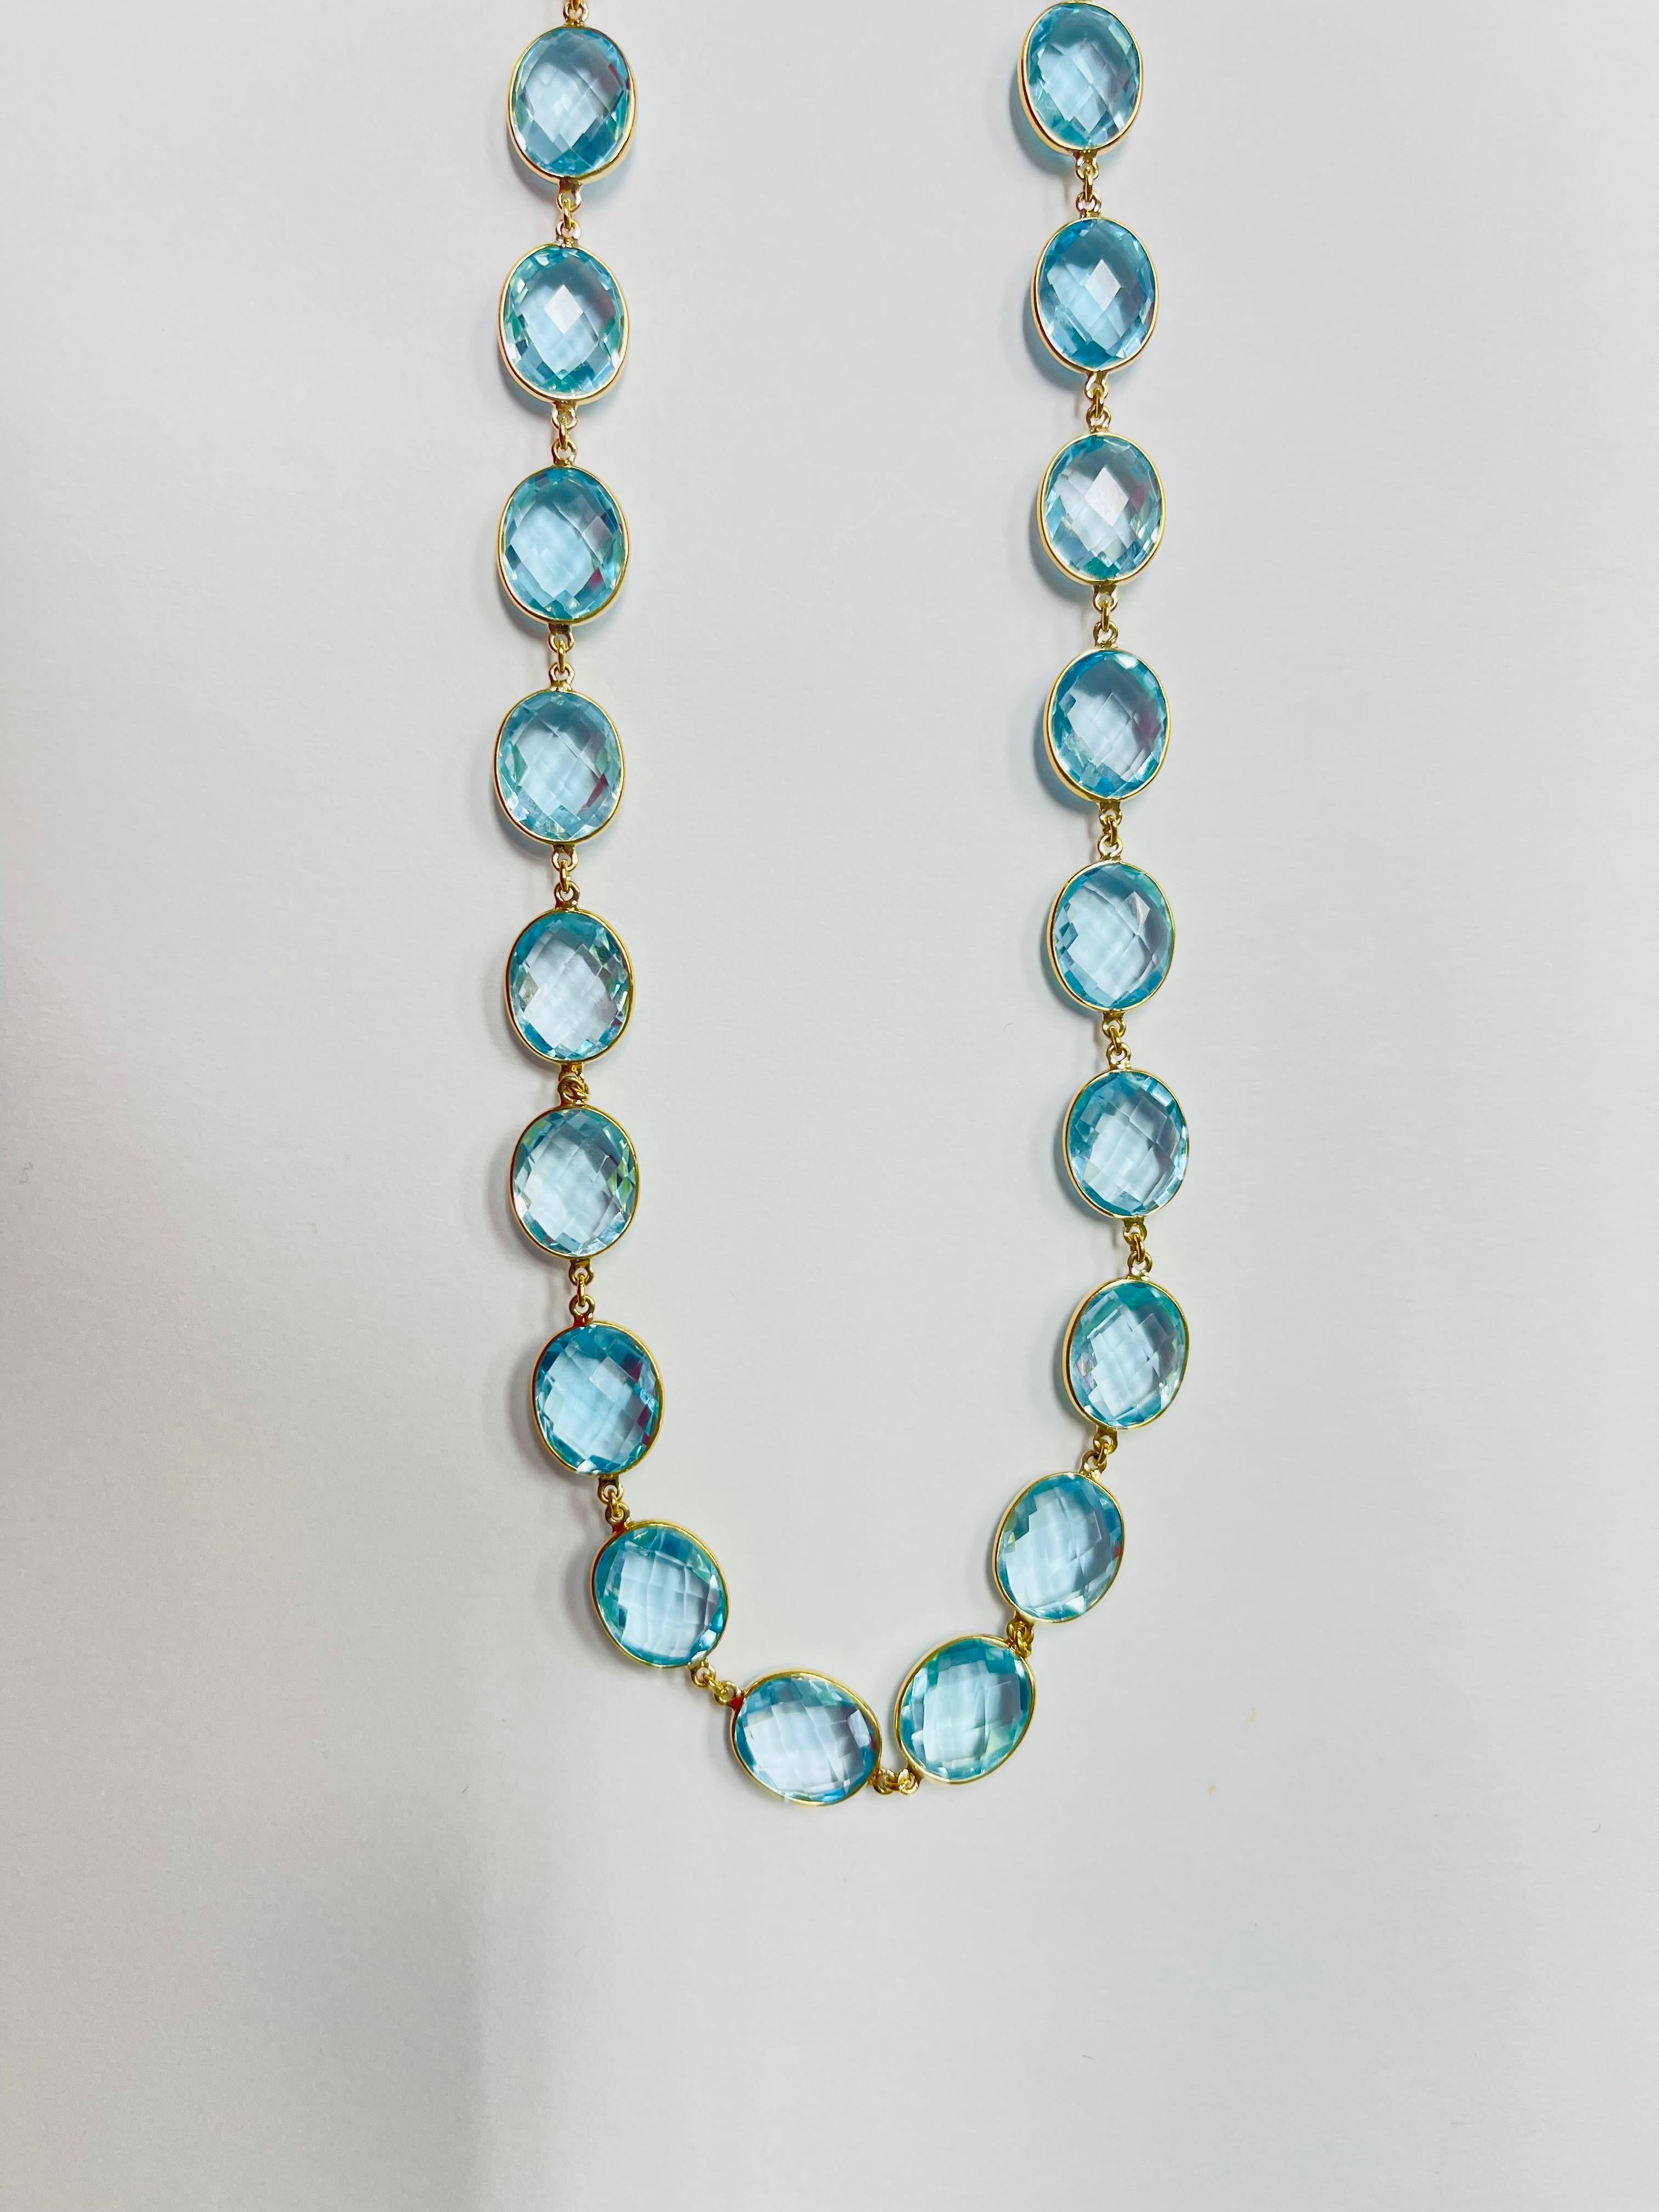 110 carats blue topaz necklace hand crafted in 18k yellow gold. 
The details are as follows :
Blue topaz weight : 110 carats 
Metal : 18k yellow gold 
Length : 18